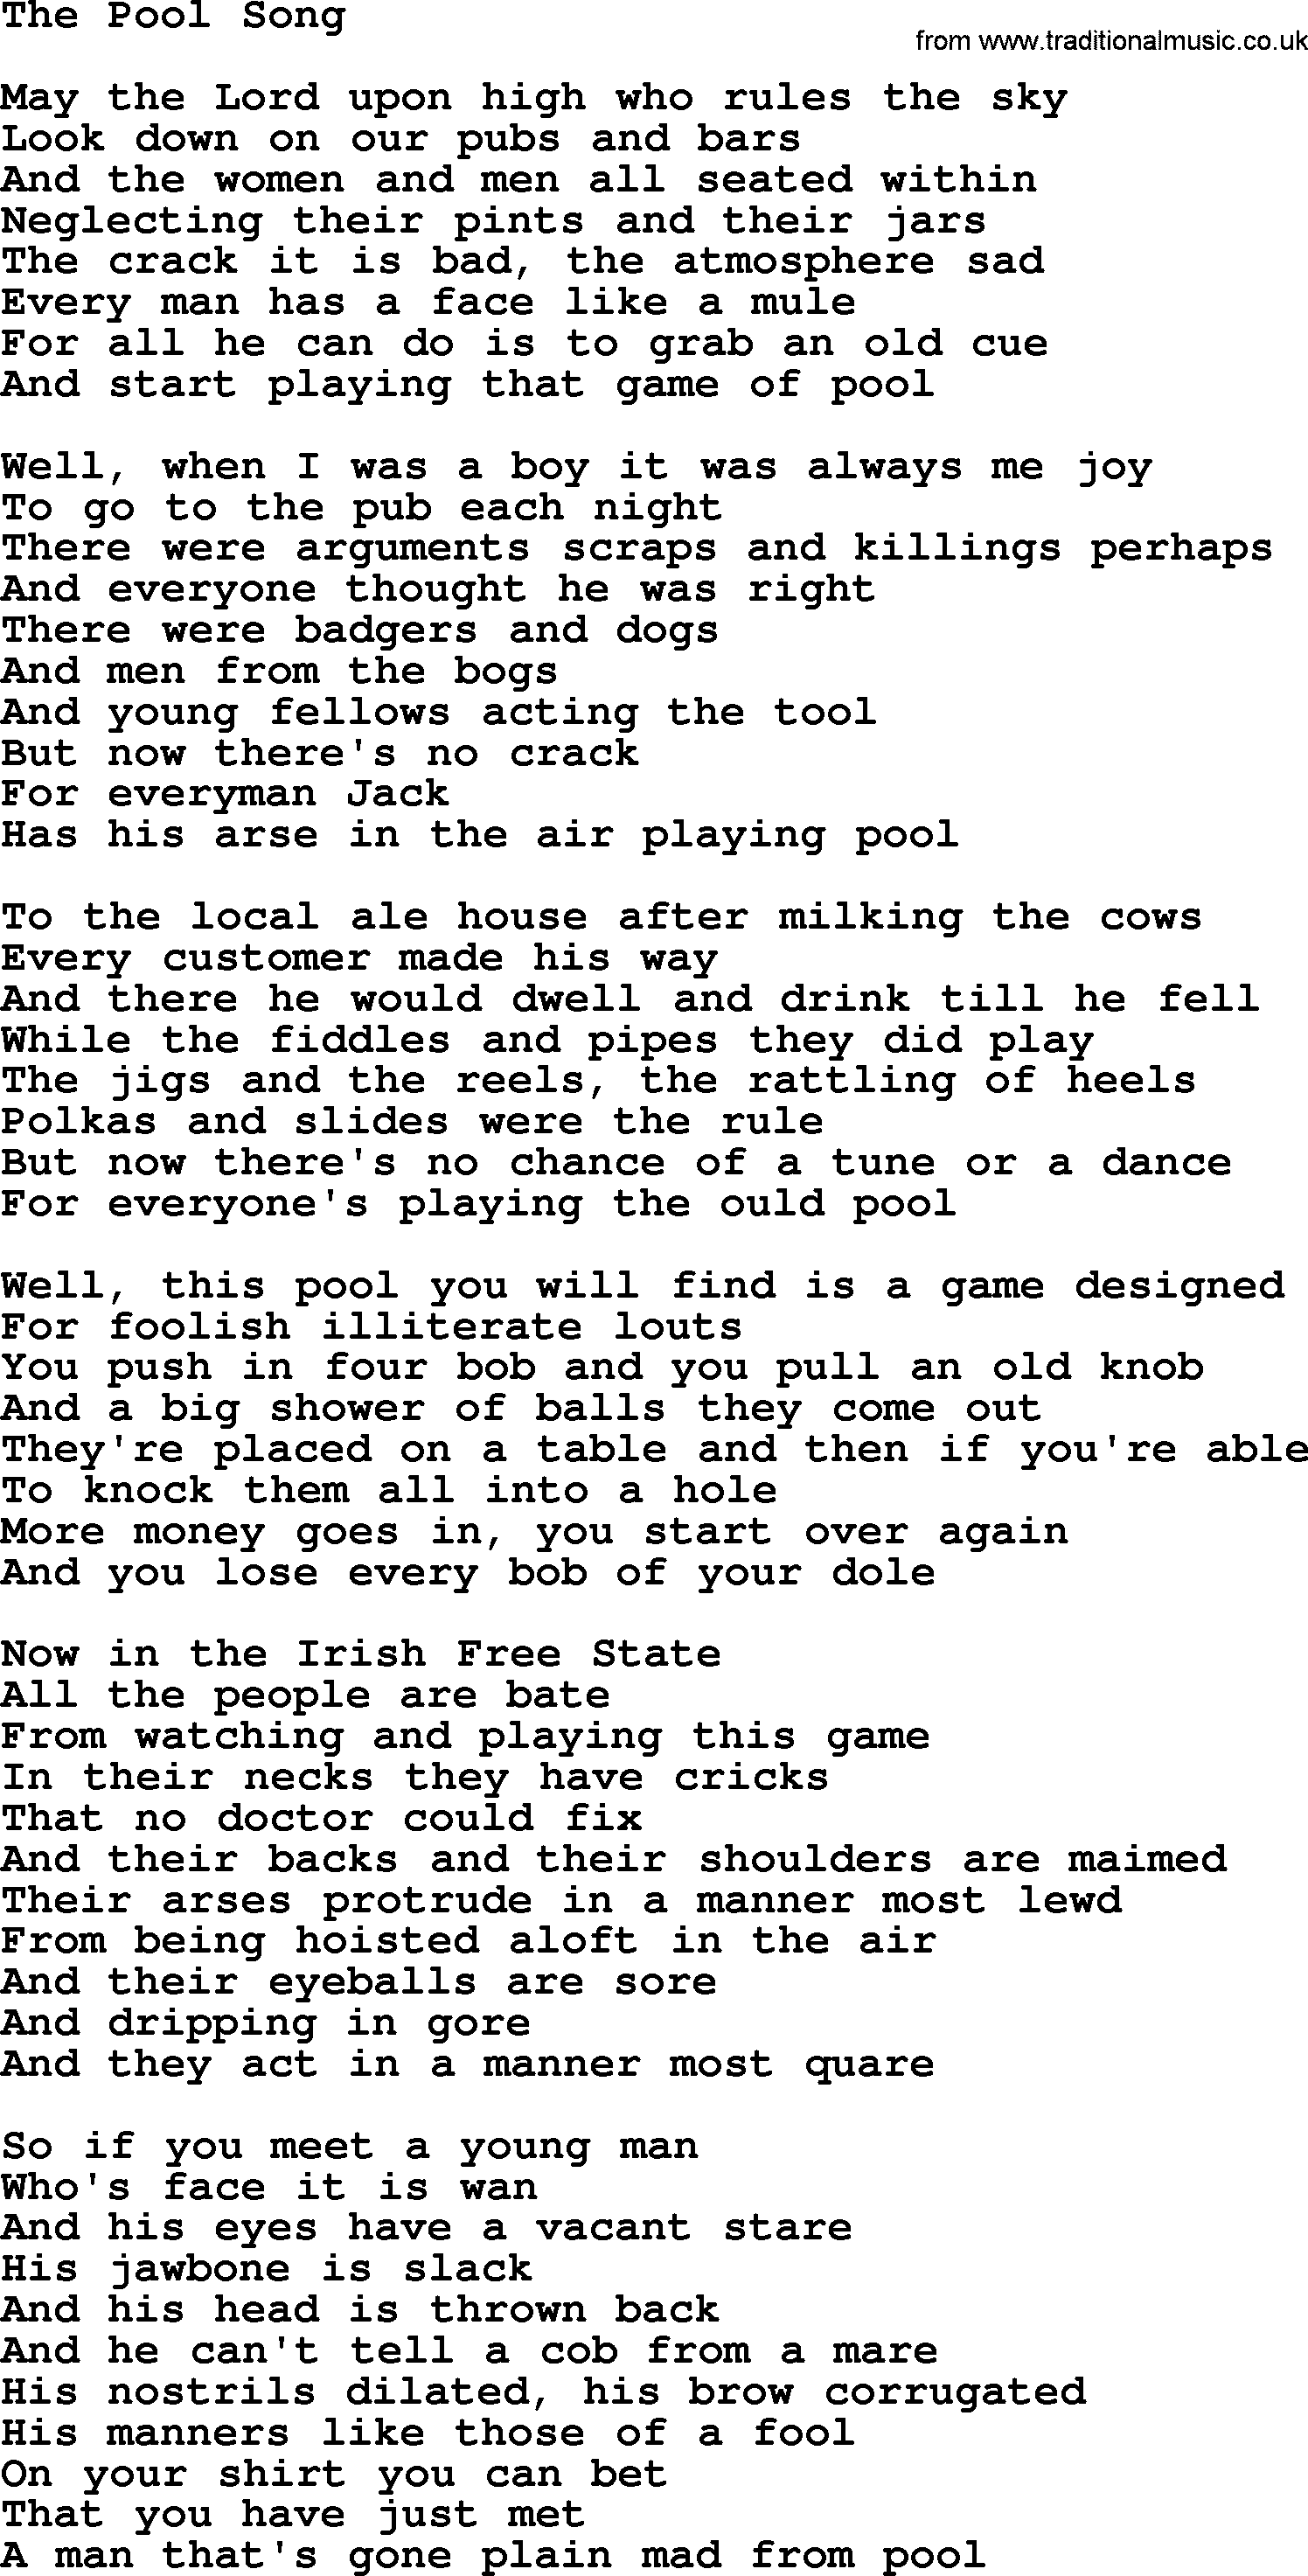 The Dubliners song: The Pool Song, lyrics